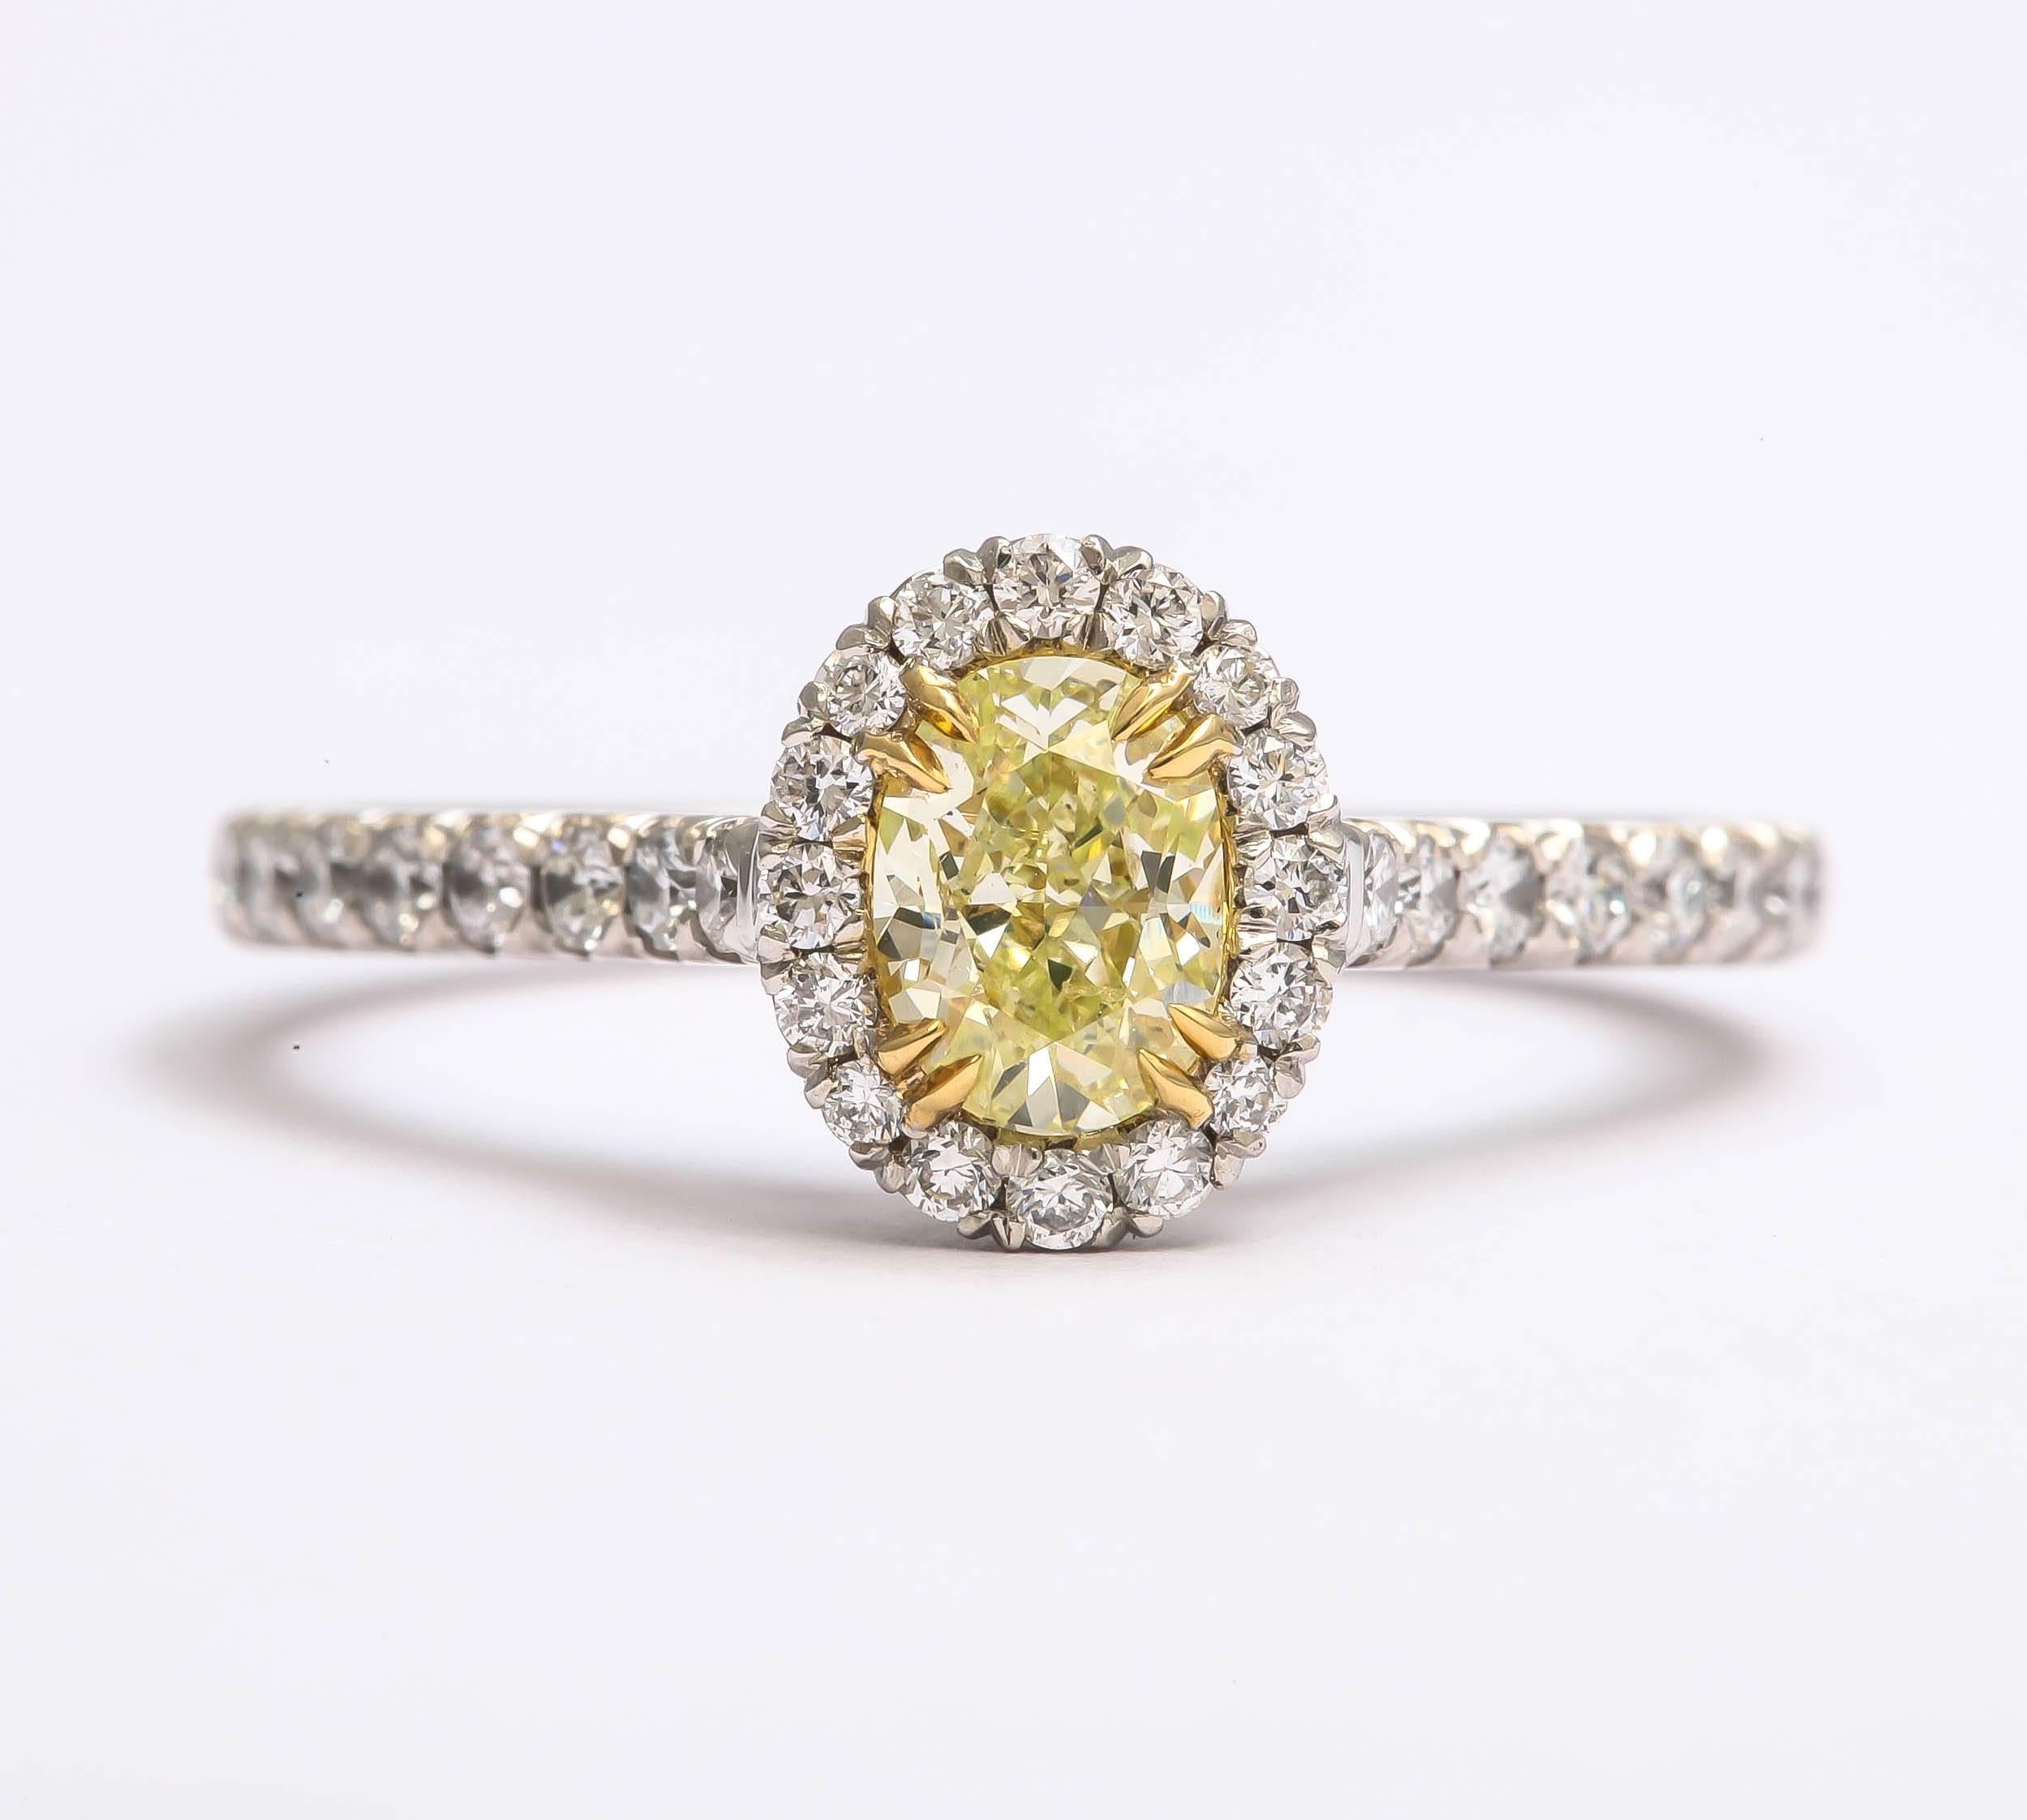 This unique fancy yellow green oval diamond  weighs .58 cts. The total weight of diamonds in the ring is 1.10 cts. The 42 white diamonds surrounding the oval, weigh .52 ct , they are G color, SI 1 clarity and are set in a halo style. The ring is